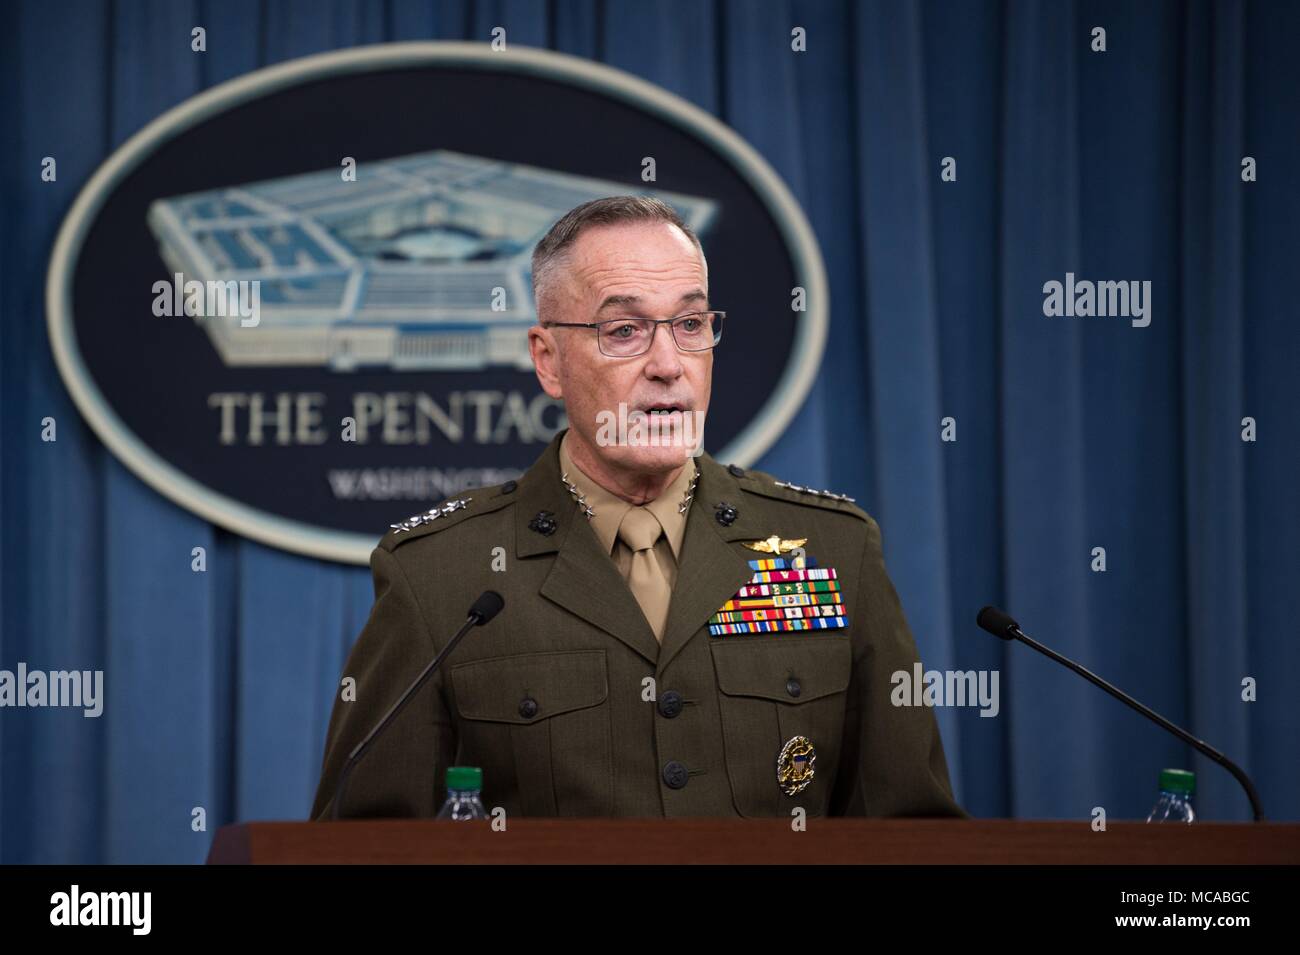 Washington DC, USA  13th April 2018 U.S. Chairman of the Joint Chiefs Gen. Joseph Dunford, briefs reporters on U.S. air and sea strikes on Syria during a joint press conference at the Pentagon April 13, 2018 in Washington, D.C. The U.S., France and the United Kingdom launched a coordinated retaliation for a chemical weapons attack on civilians by the Assad regime. Credit: Planetpix/Alamy Live News Stock Photo